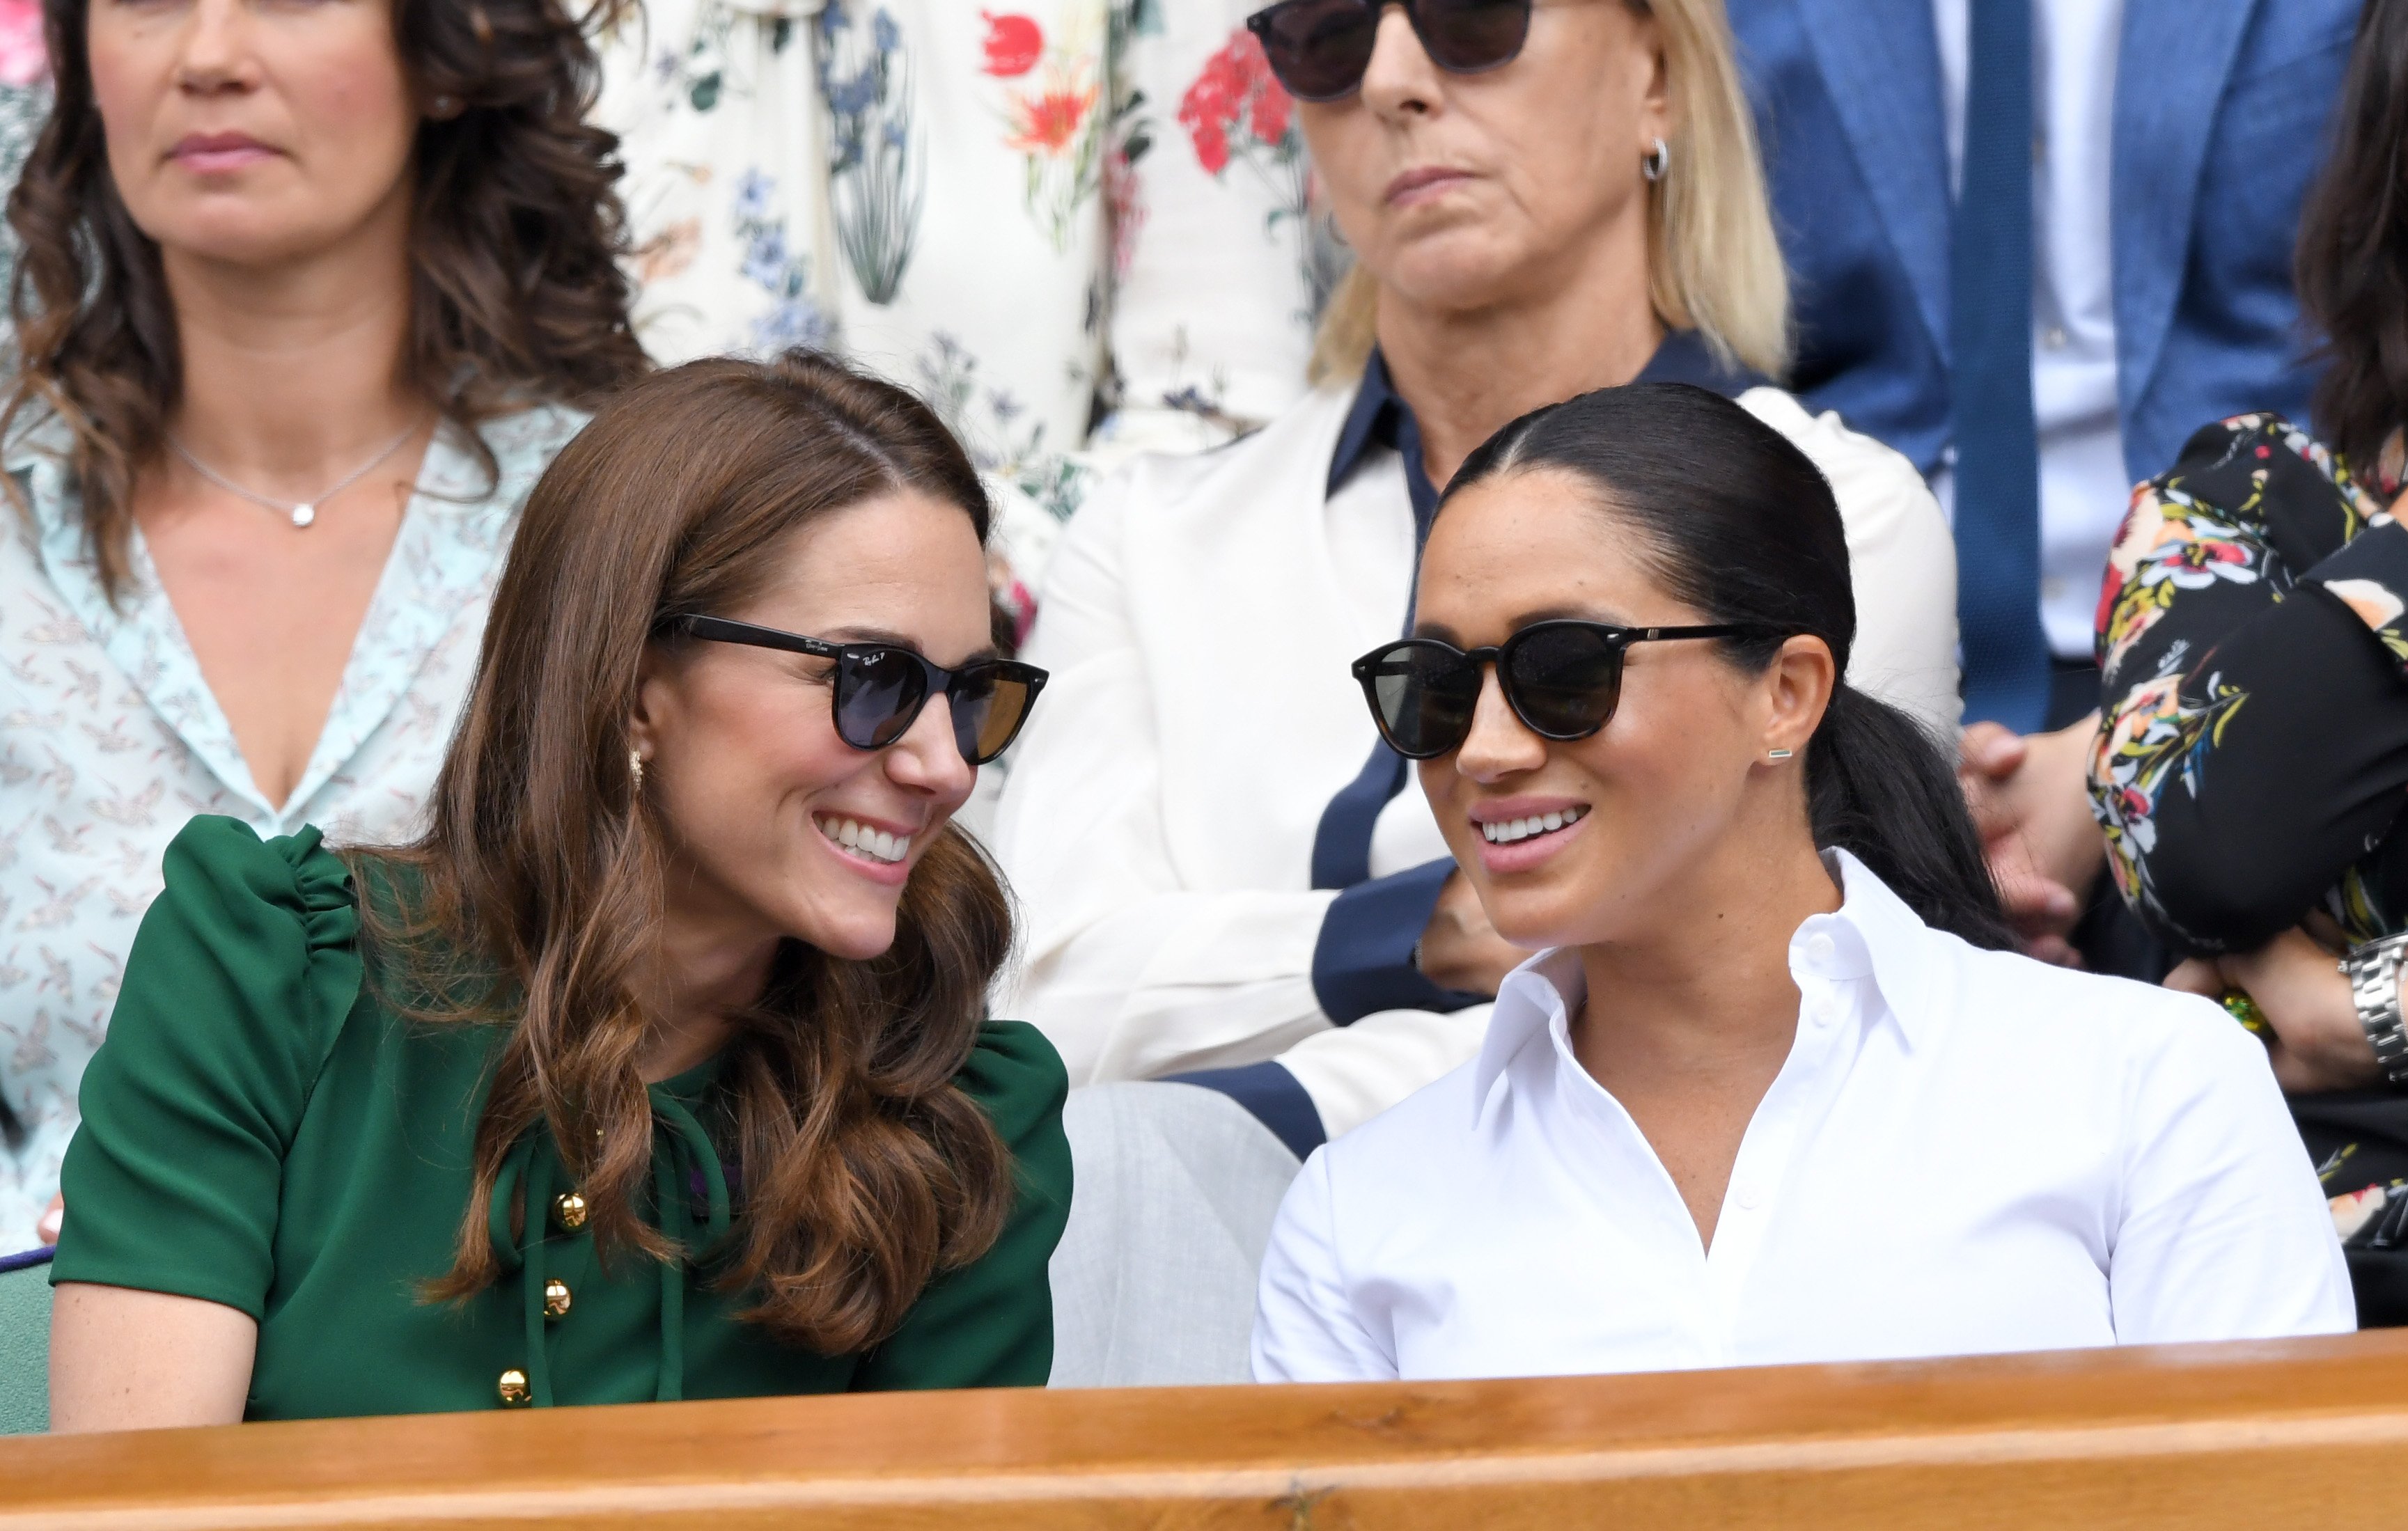 Kate Middleton in green dress and shades talking to Meghan Markle in white dress